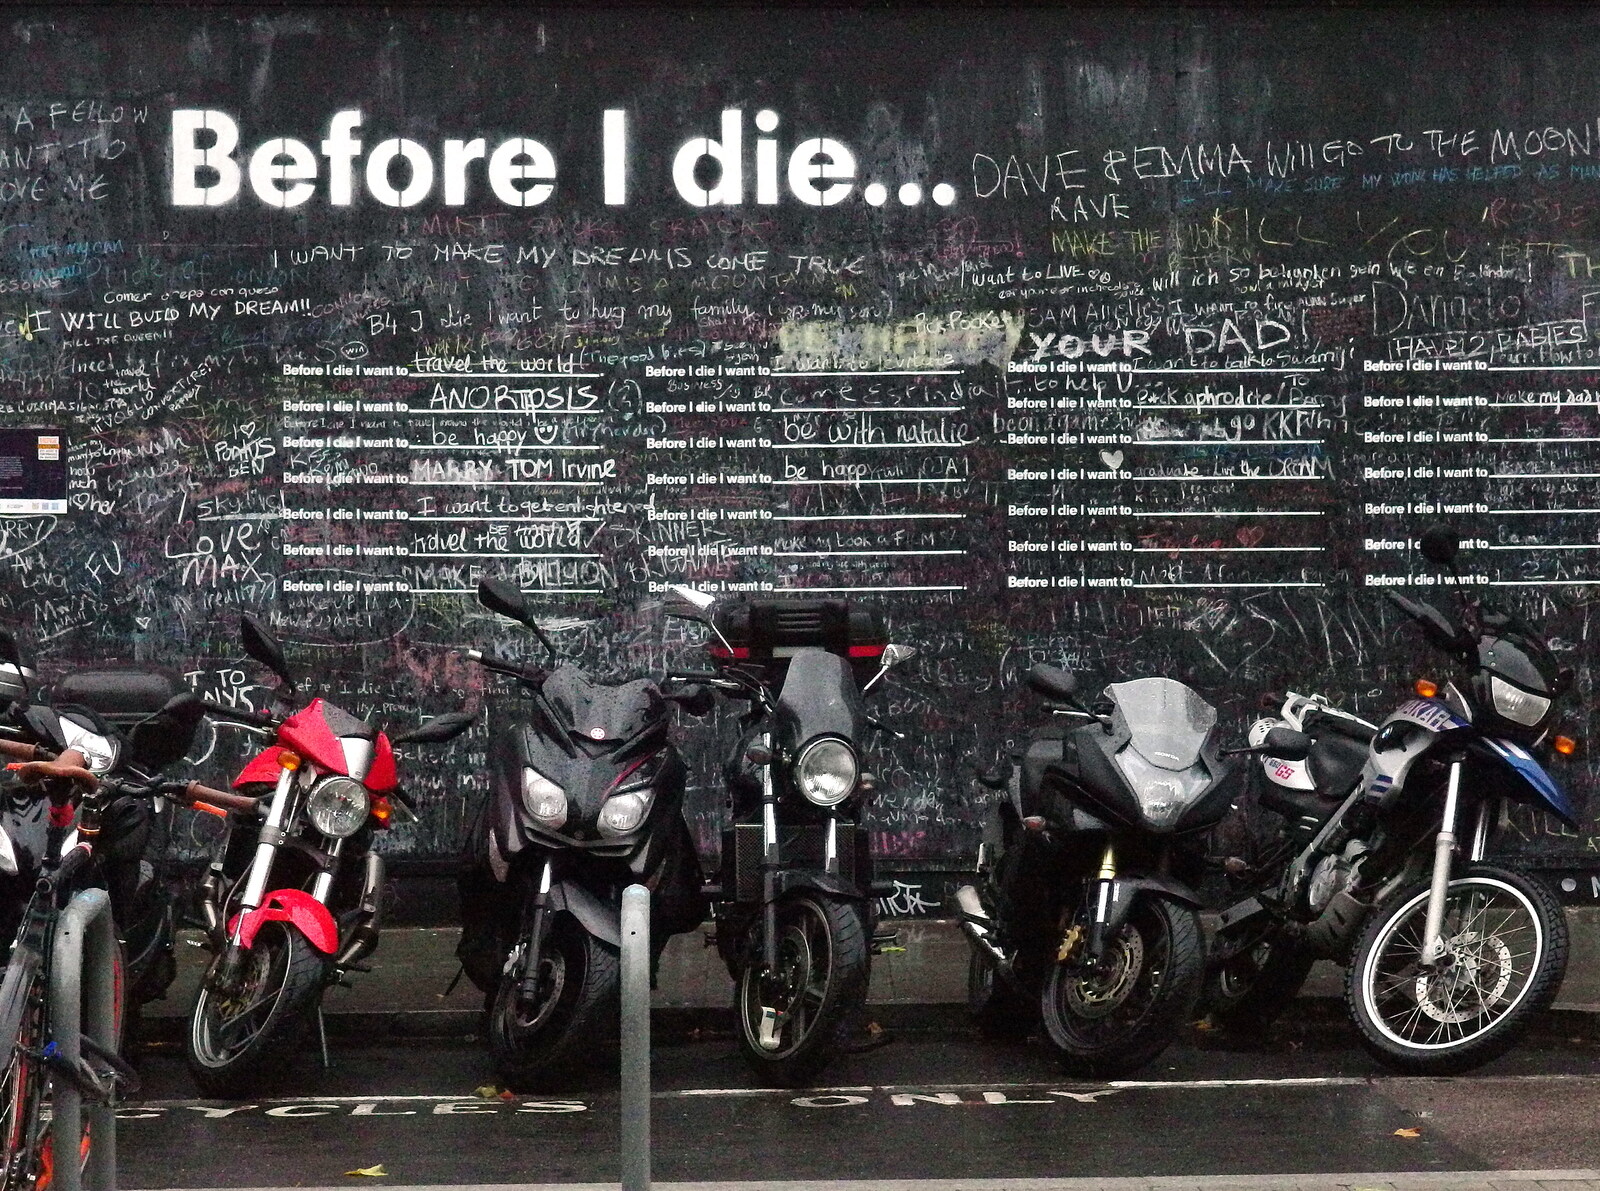 Before I Die suggestions on the wall from A Rachel and Sam Evening, Gwydir Street, Cambridge - 19th October 2013